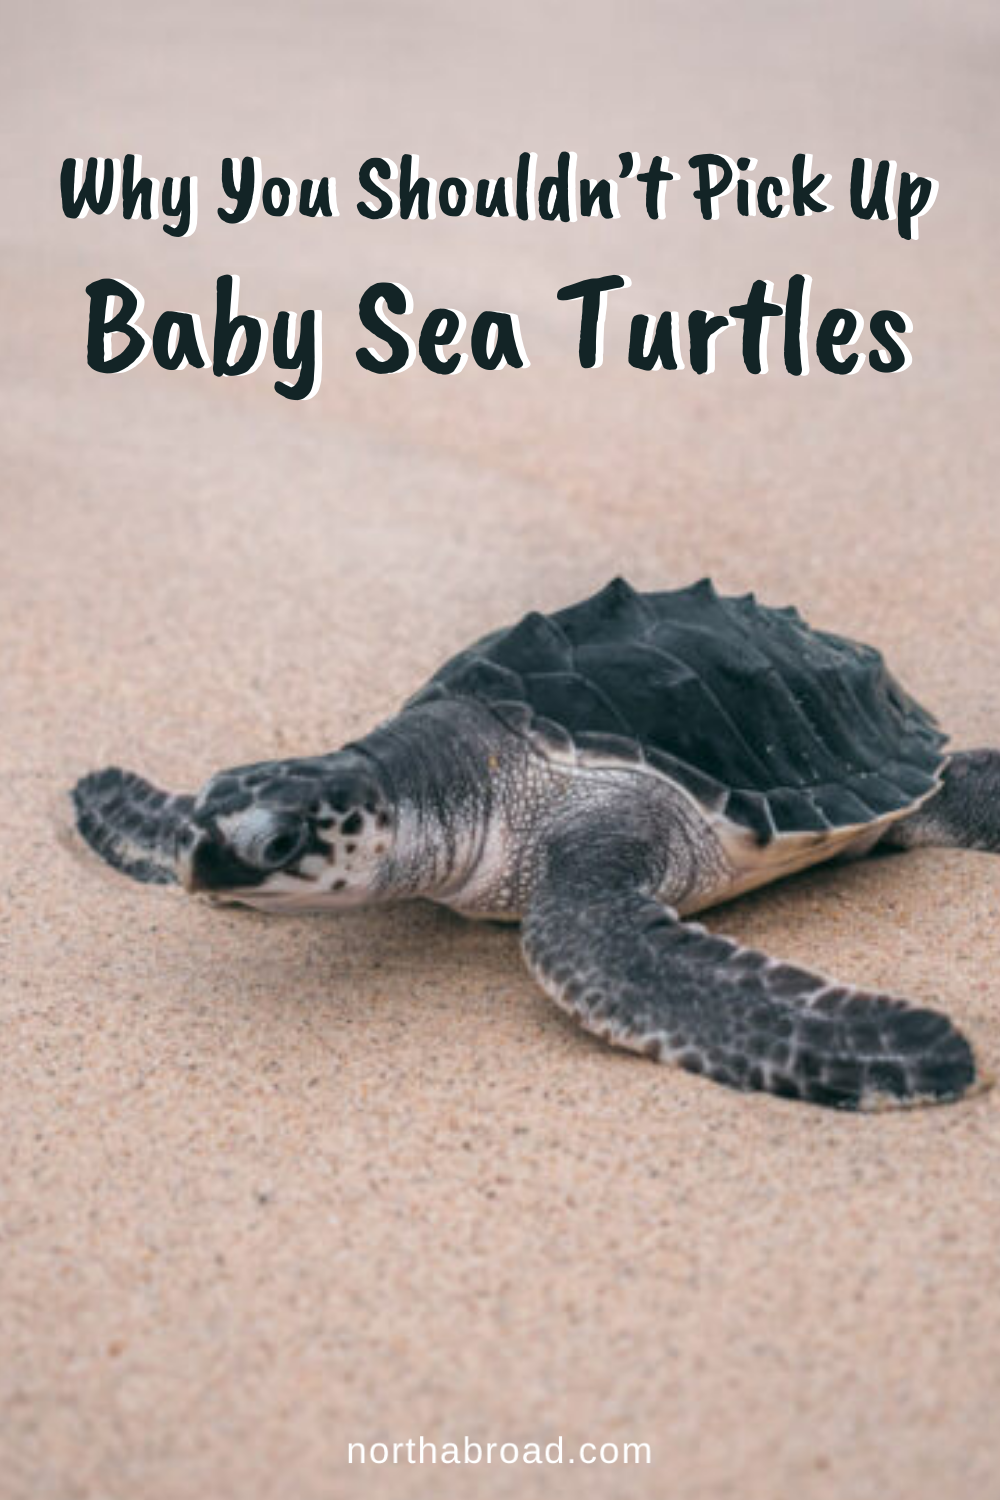 Why You Shouldn’t Pick Up Baby Sea Turtles